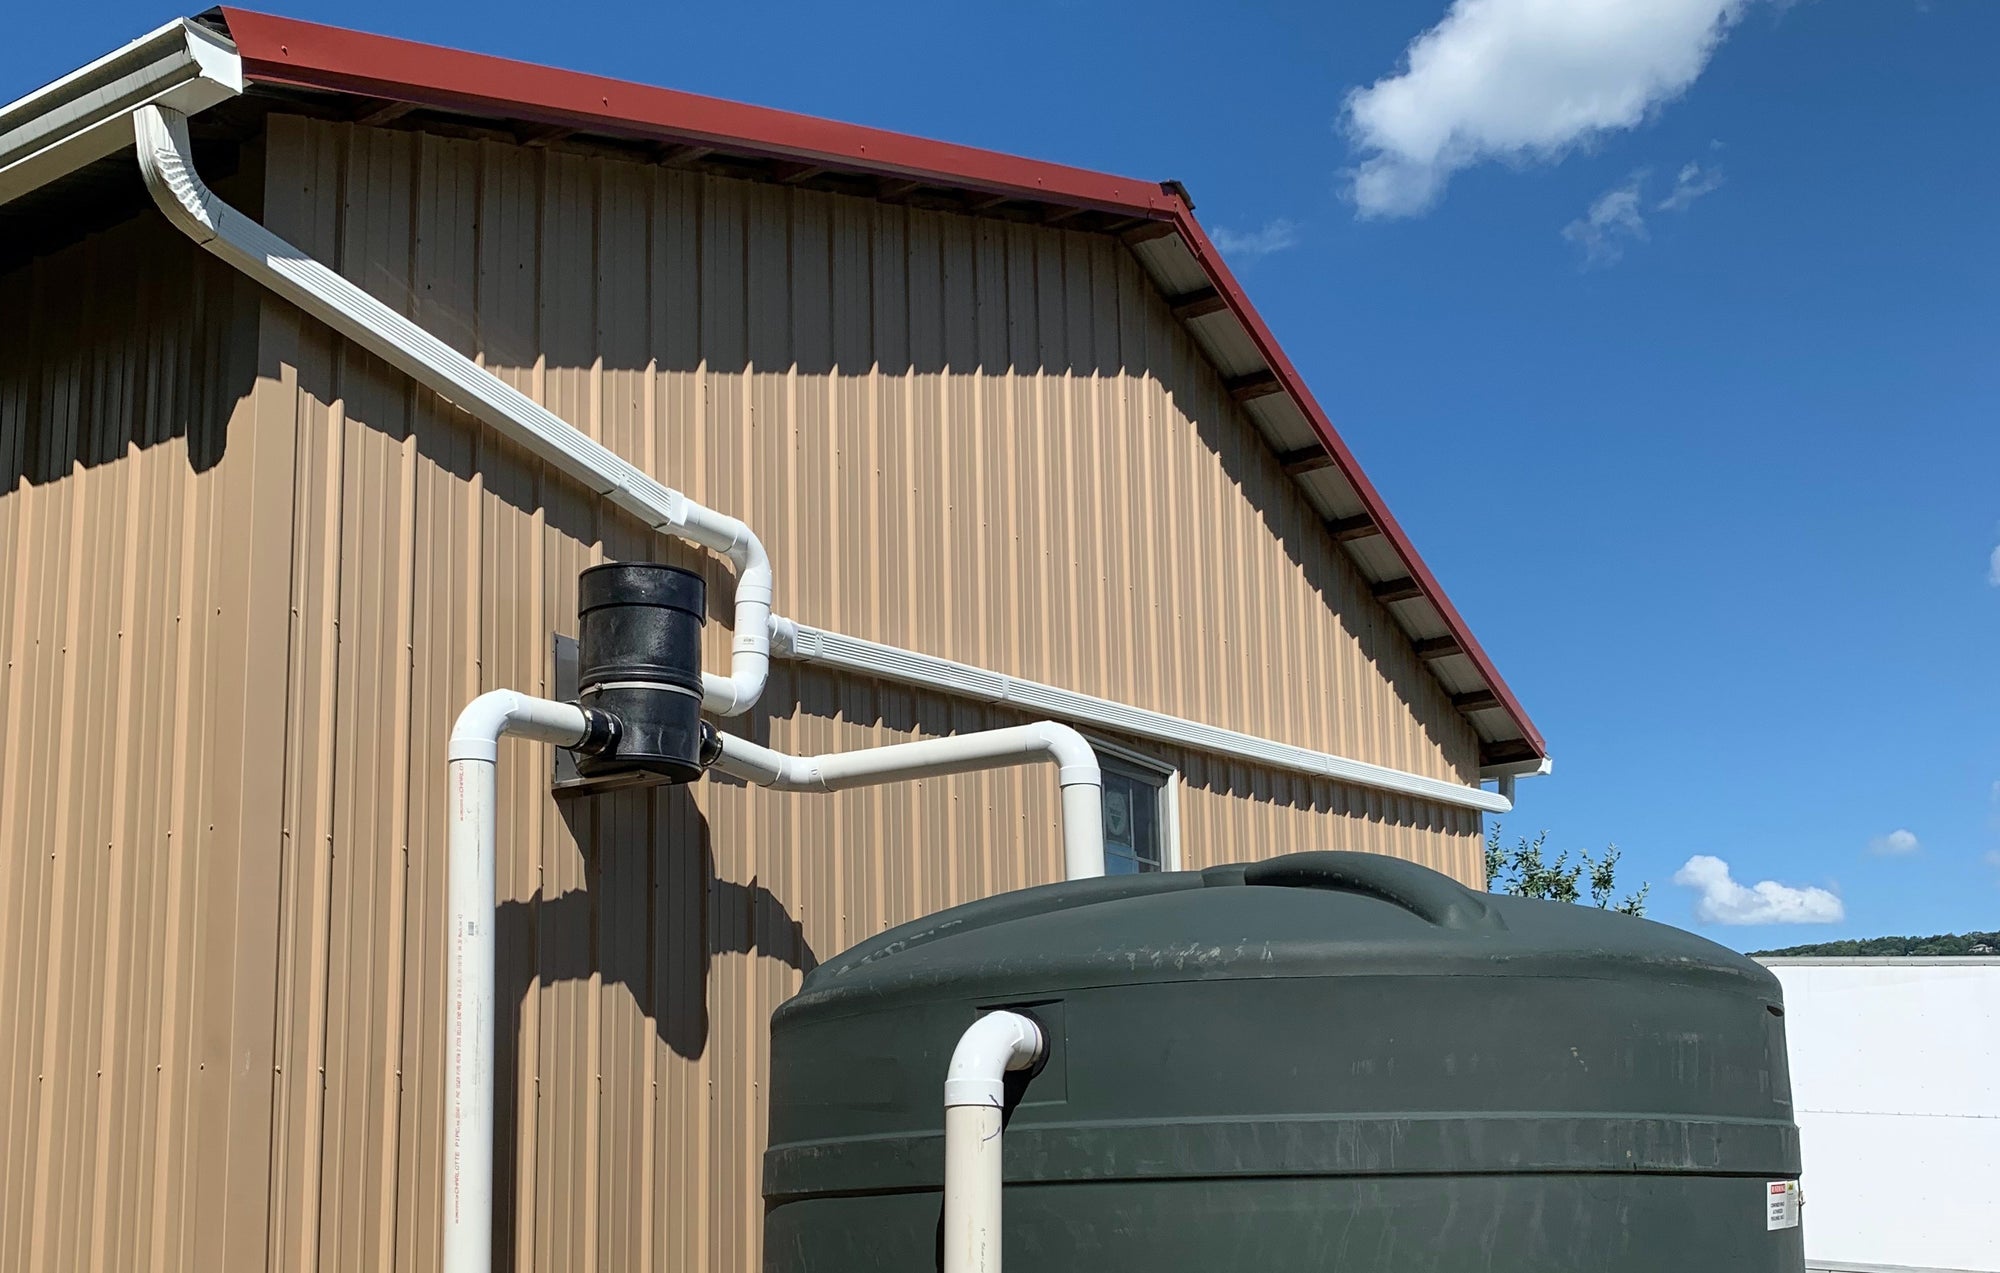 Identifying a Well-Designed Rainwater Harvesting System